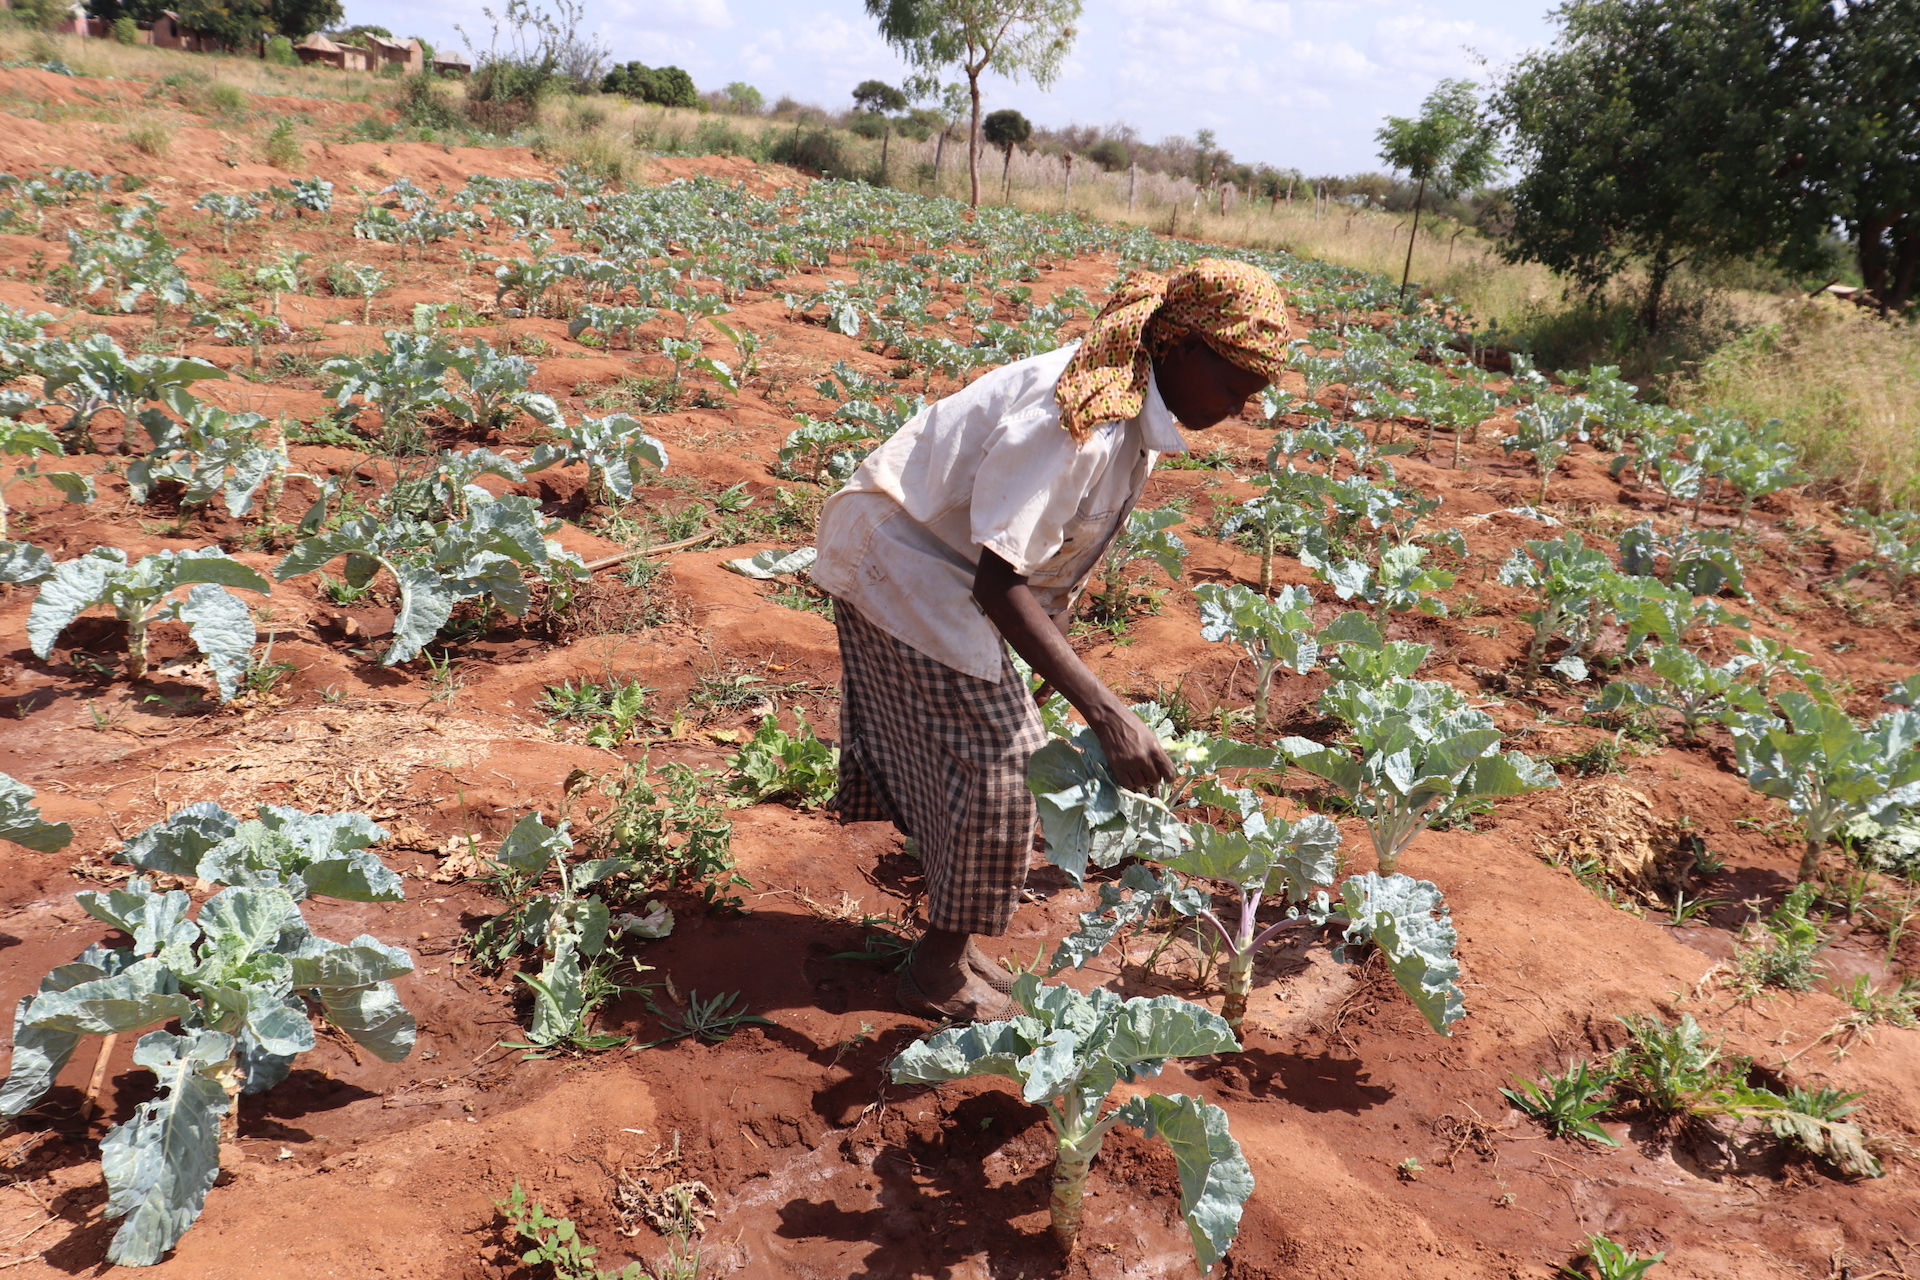 A woman harvests kale grown in zai pits. Zai pits are dug, then compost can be added before planting the seeds. Zai pits stimulate termite activity which opens up degraded or compacted soil to allow water to move through it more easily. © ADSE. Used with permission.